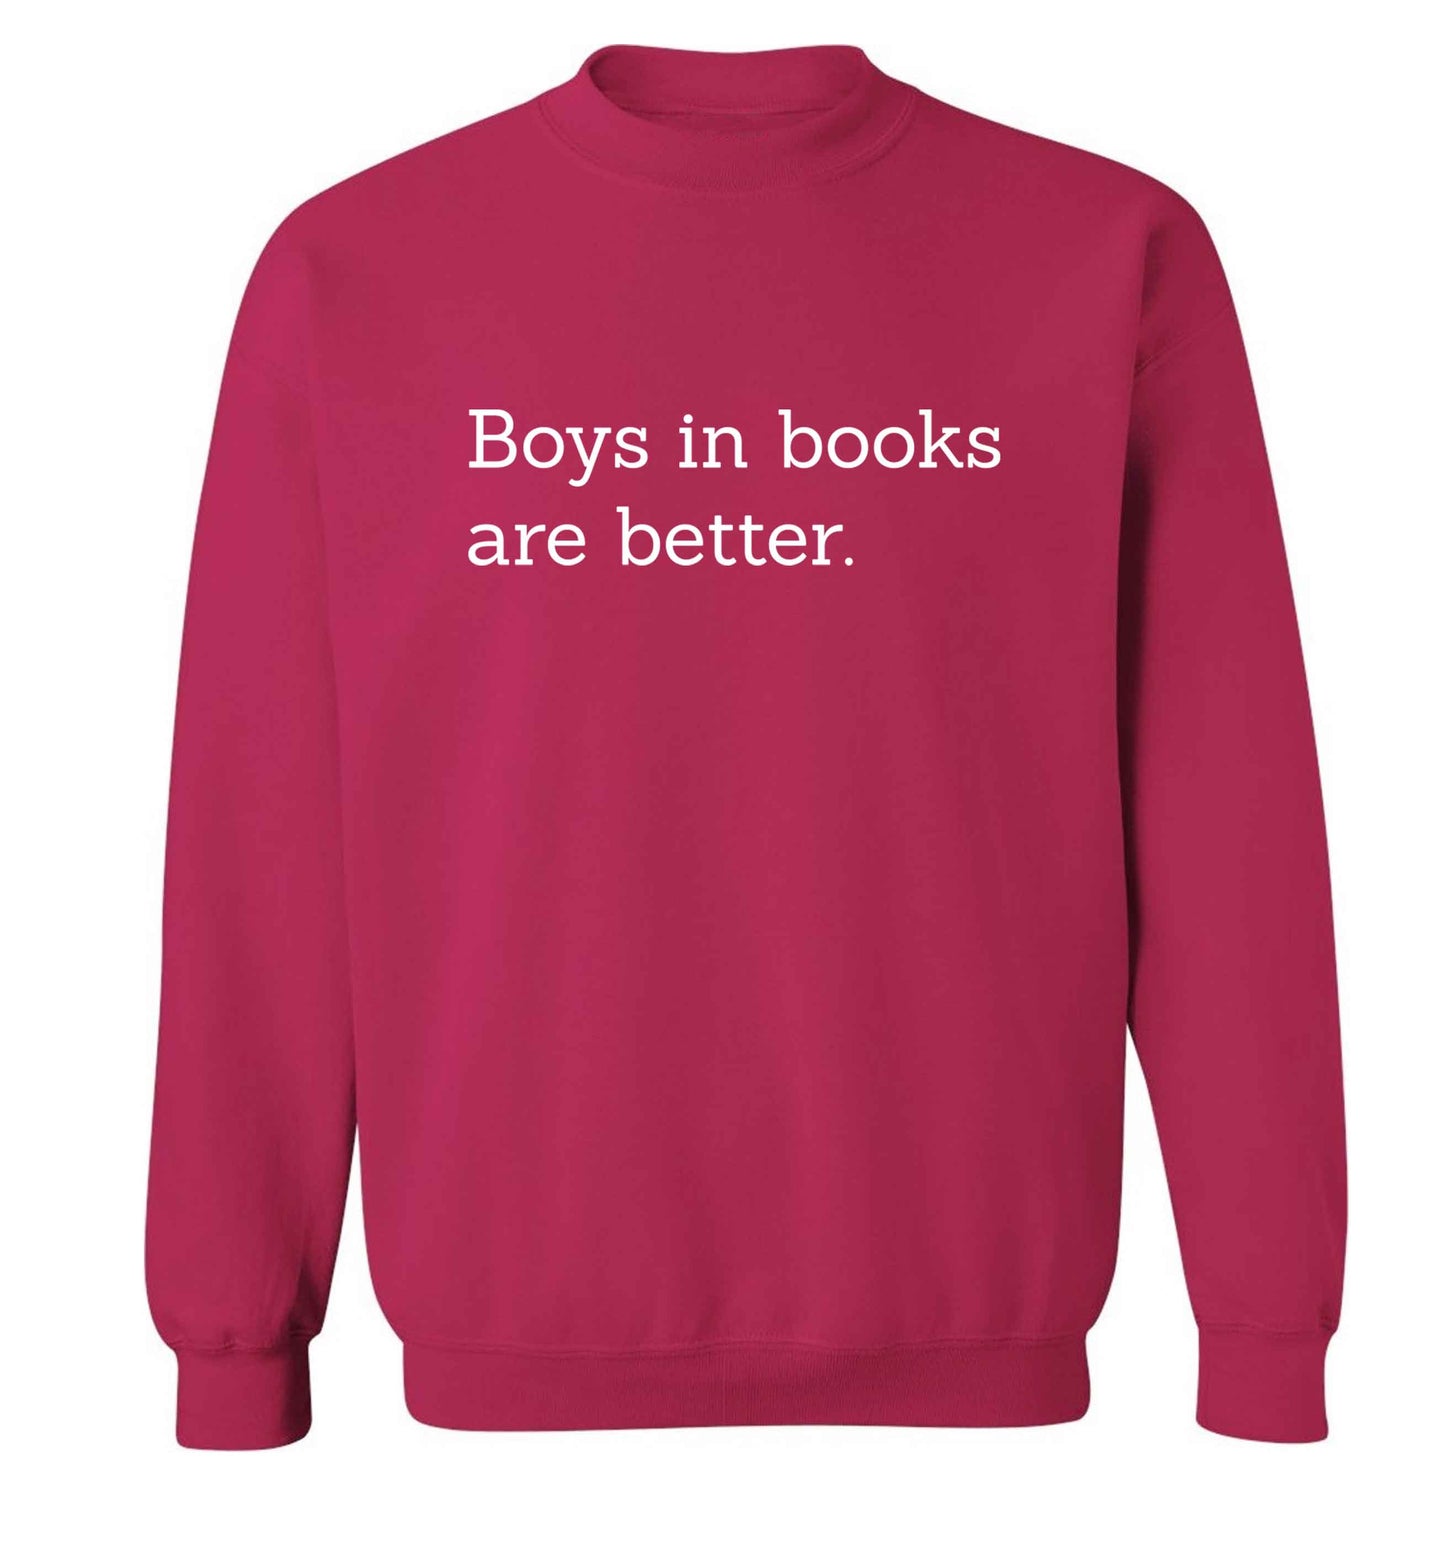 Boys in books are better adult's unisex pink sweater 2XL